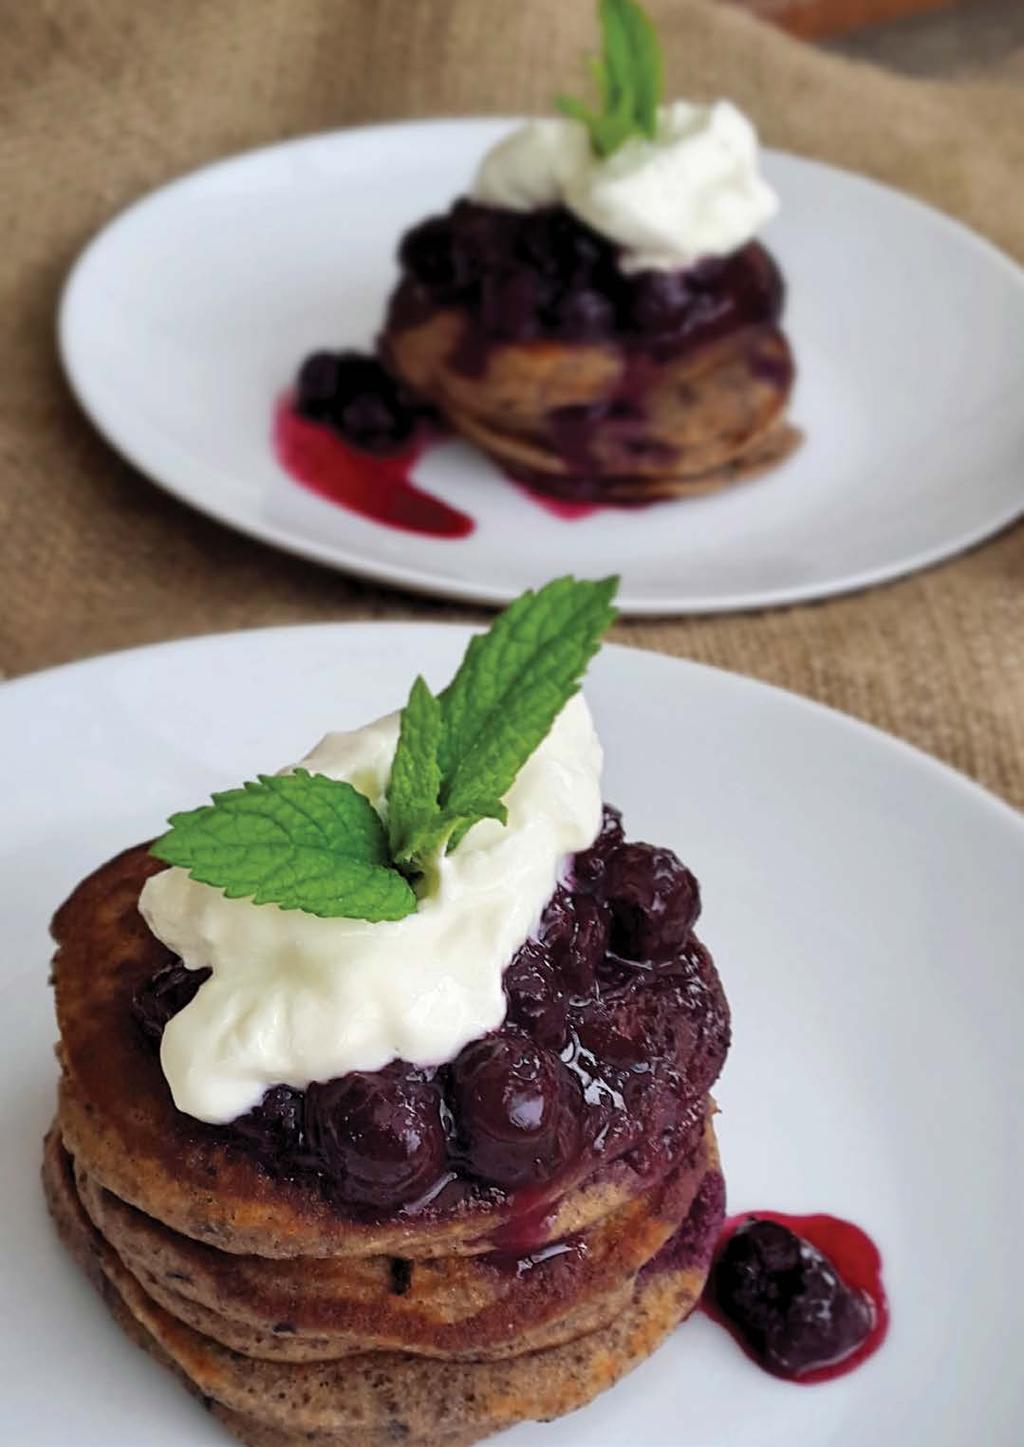 Banana & BLUEBERRY Pancakes SERVES 2 1 large banana 2 eggs 1 Tbspn Healtheries Ground Chia Superfood Blend Cacao & Coconut ½ cup Healtheries Rice Flour 2 Tbspn Healtheries 99% Sugar Free Dark